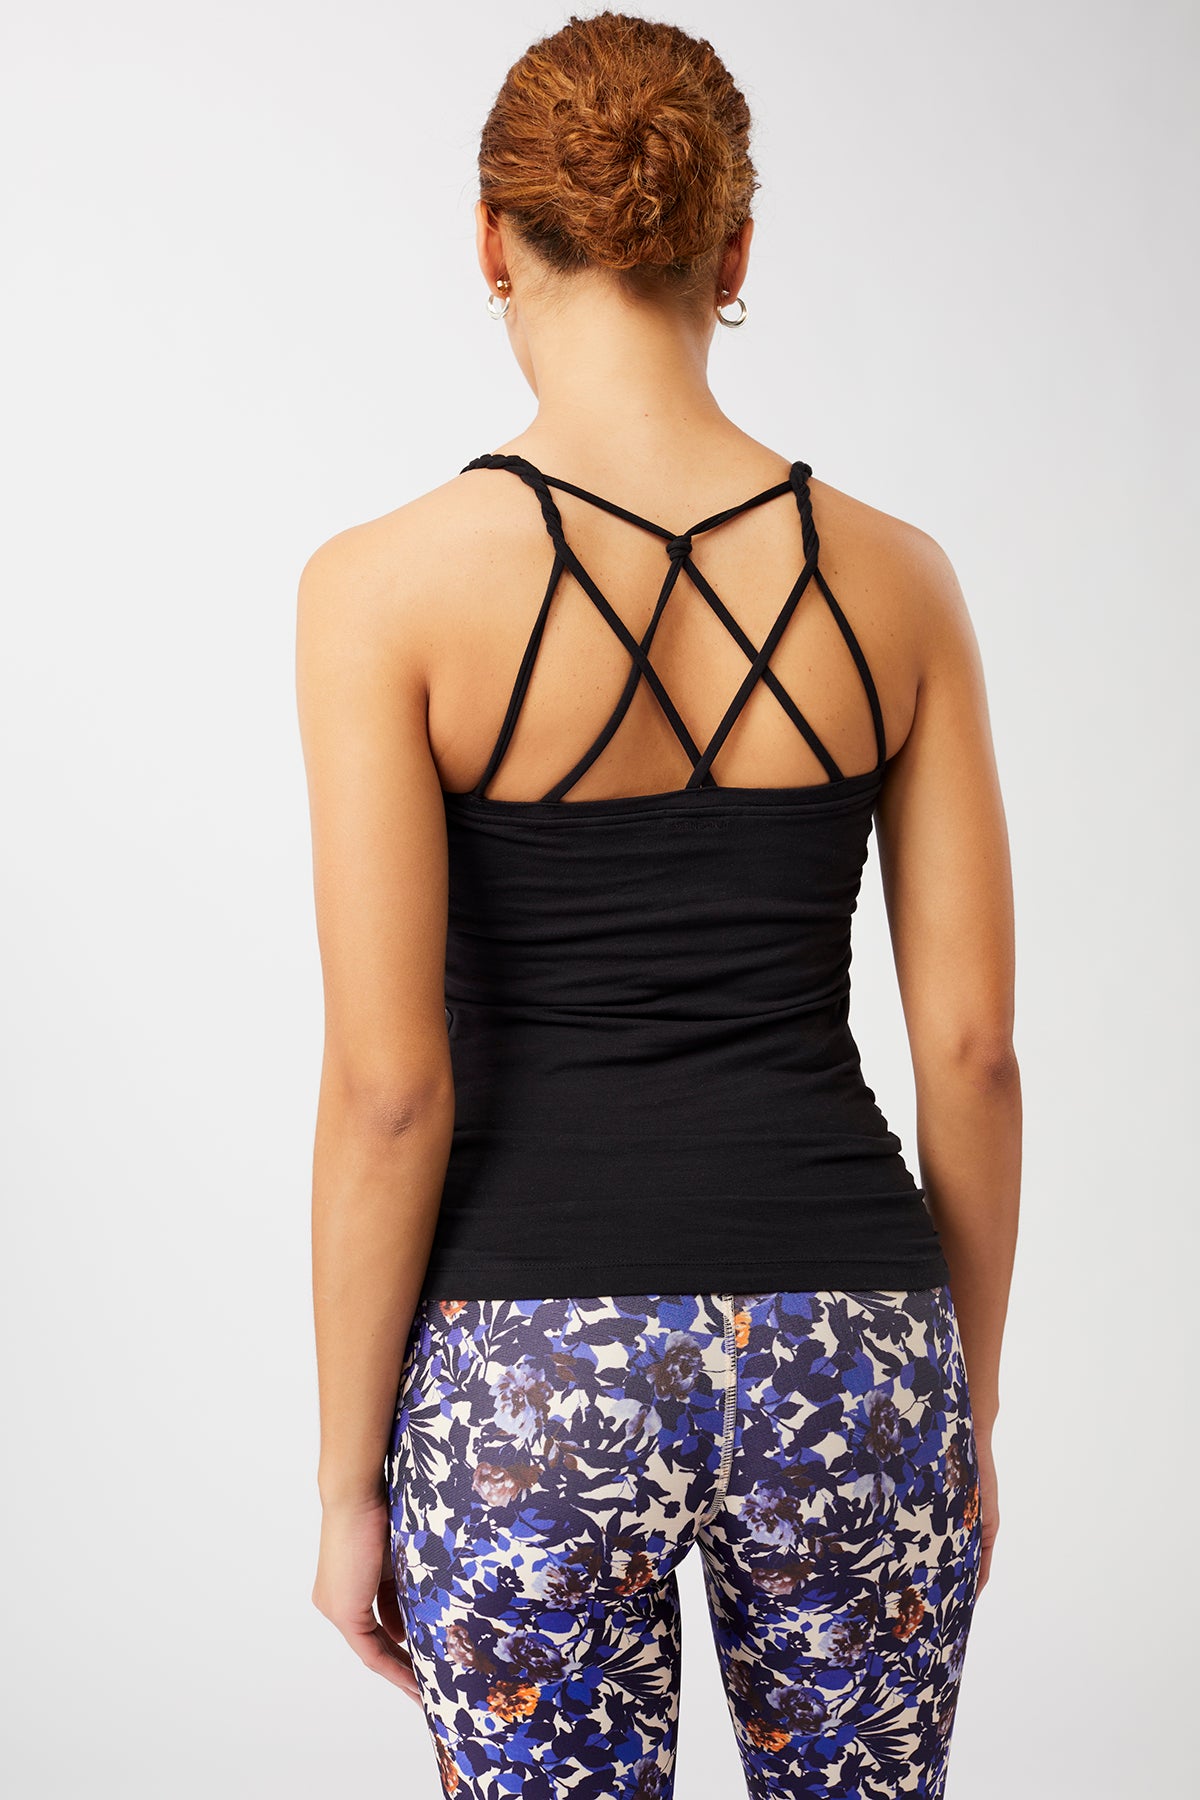 Mandala New Cable Top for women in color Black